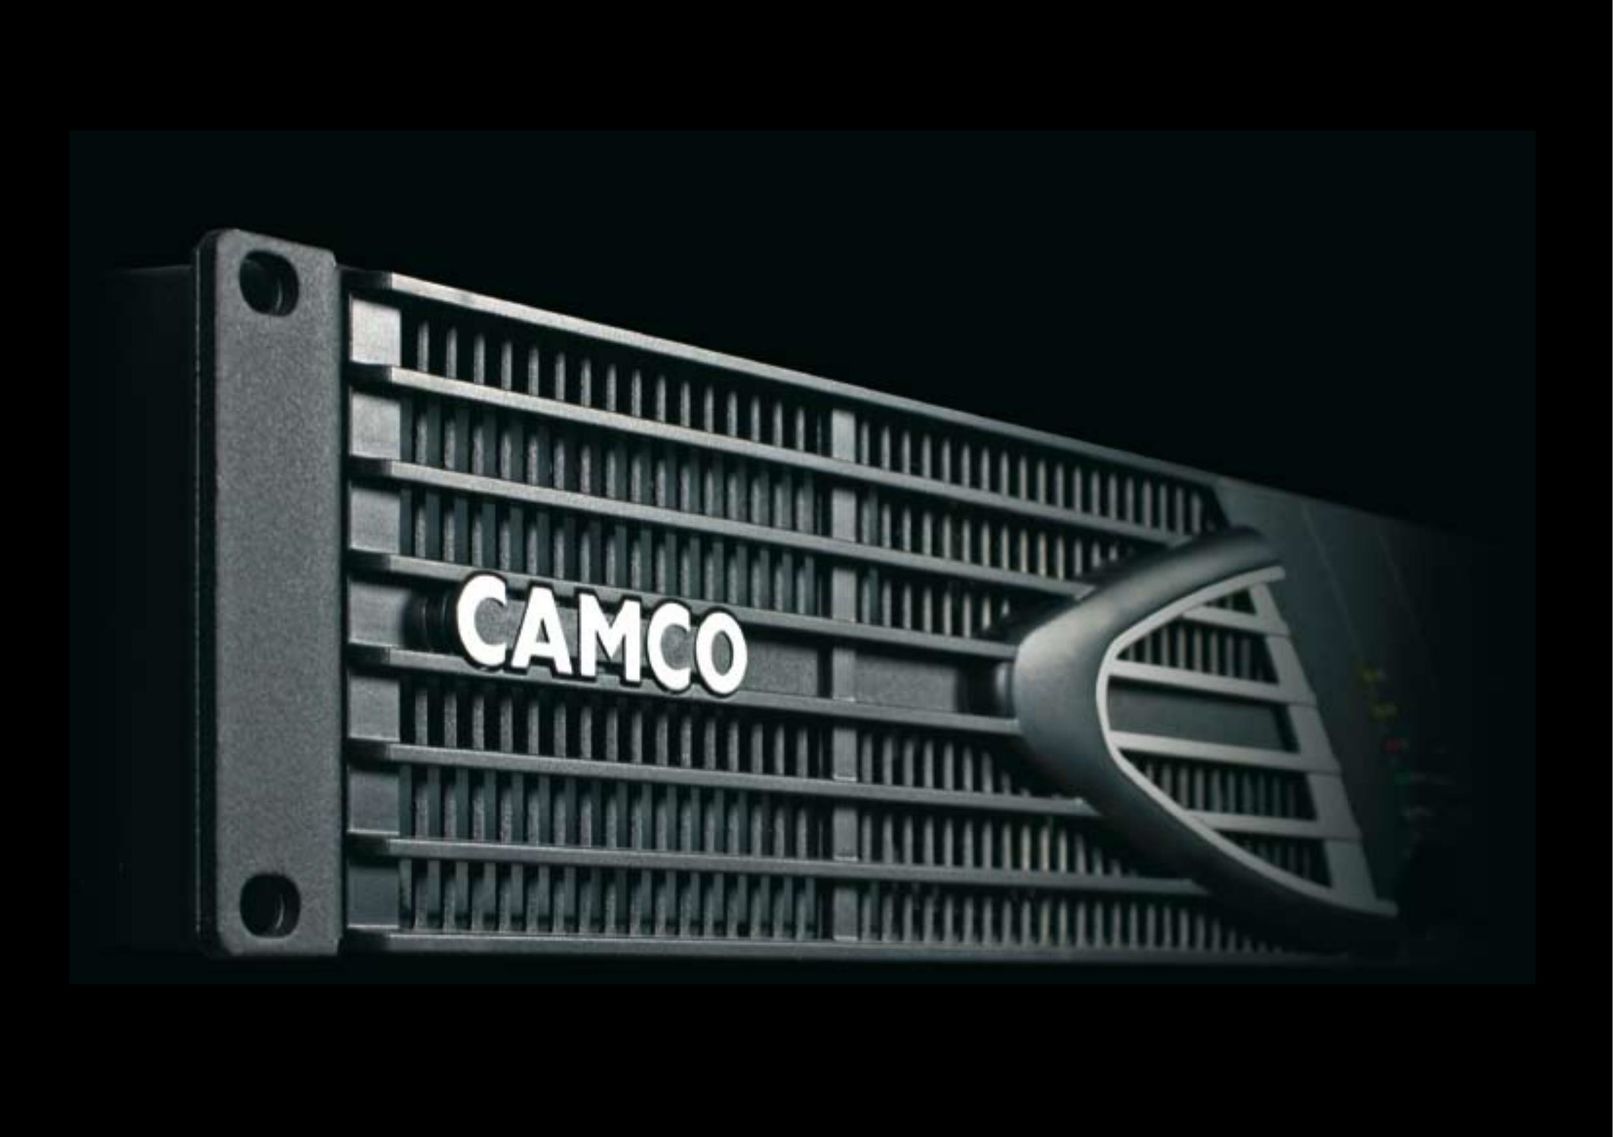 Camco P.2 Series Stereo Amplifier User Manual